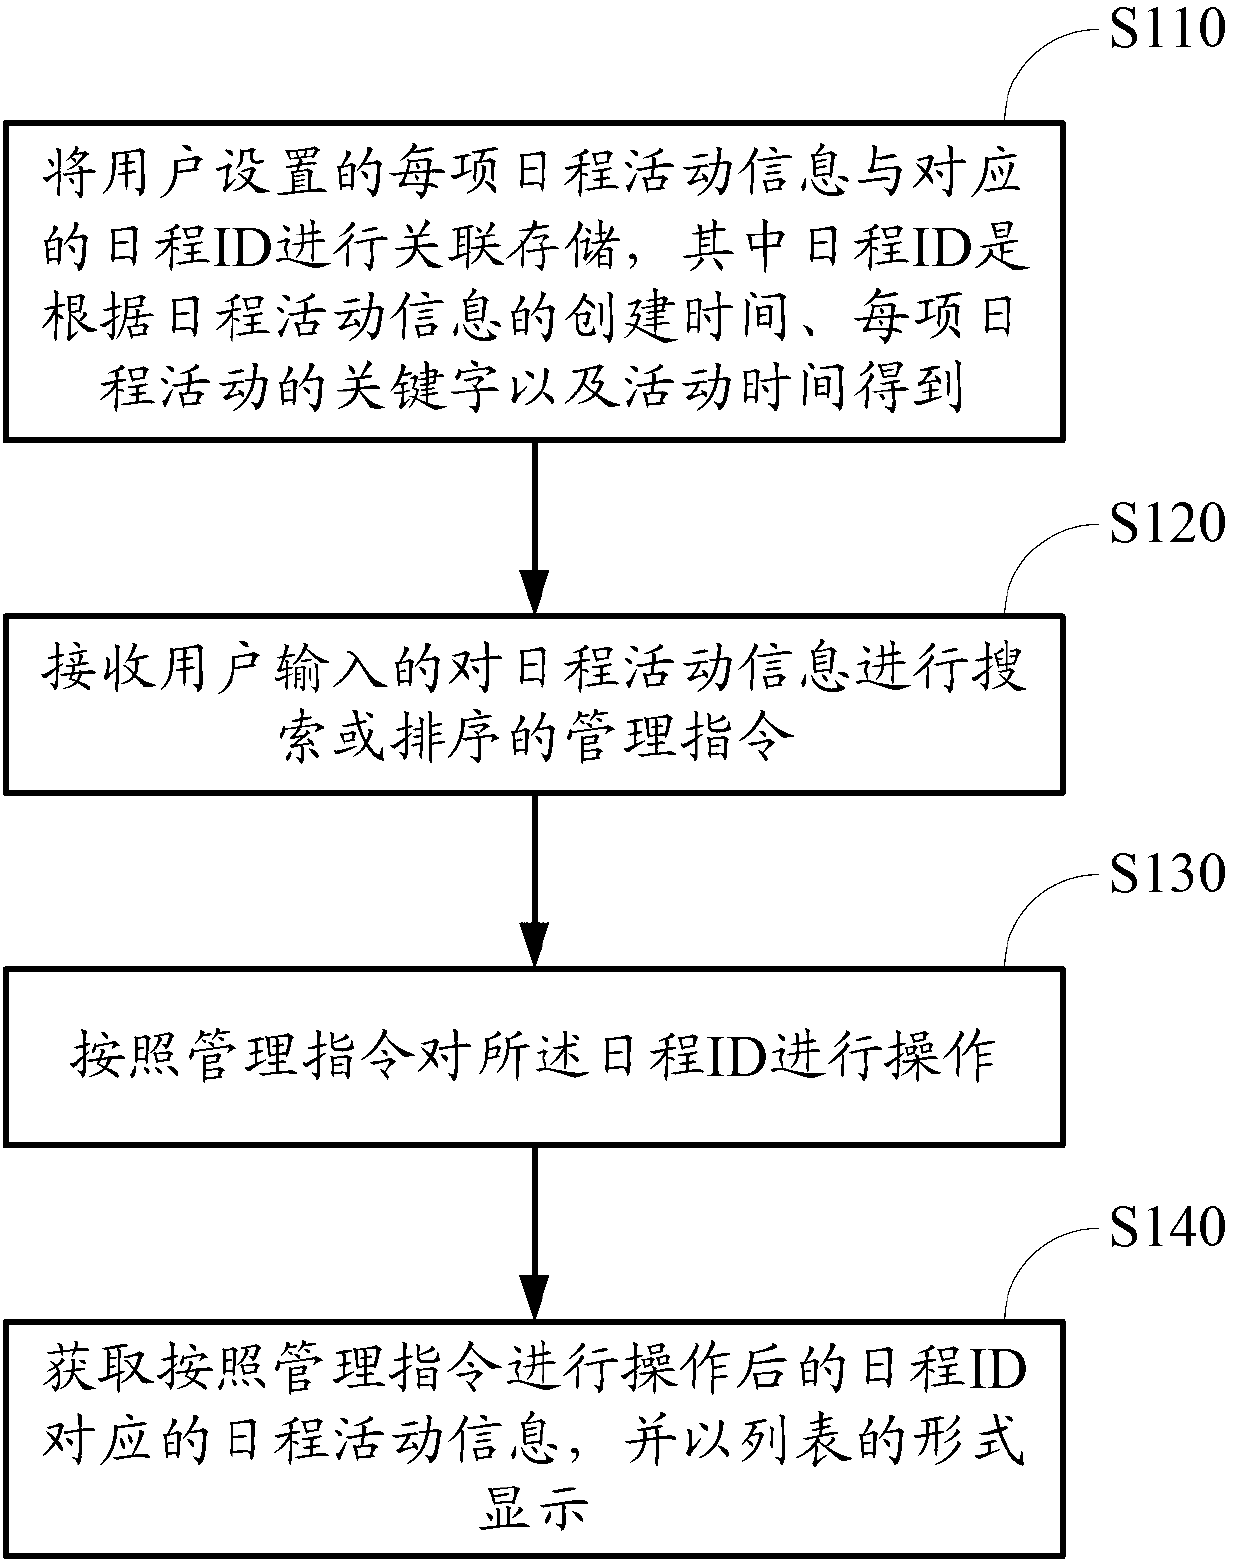 Mobile terminal schedule management method and system